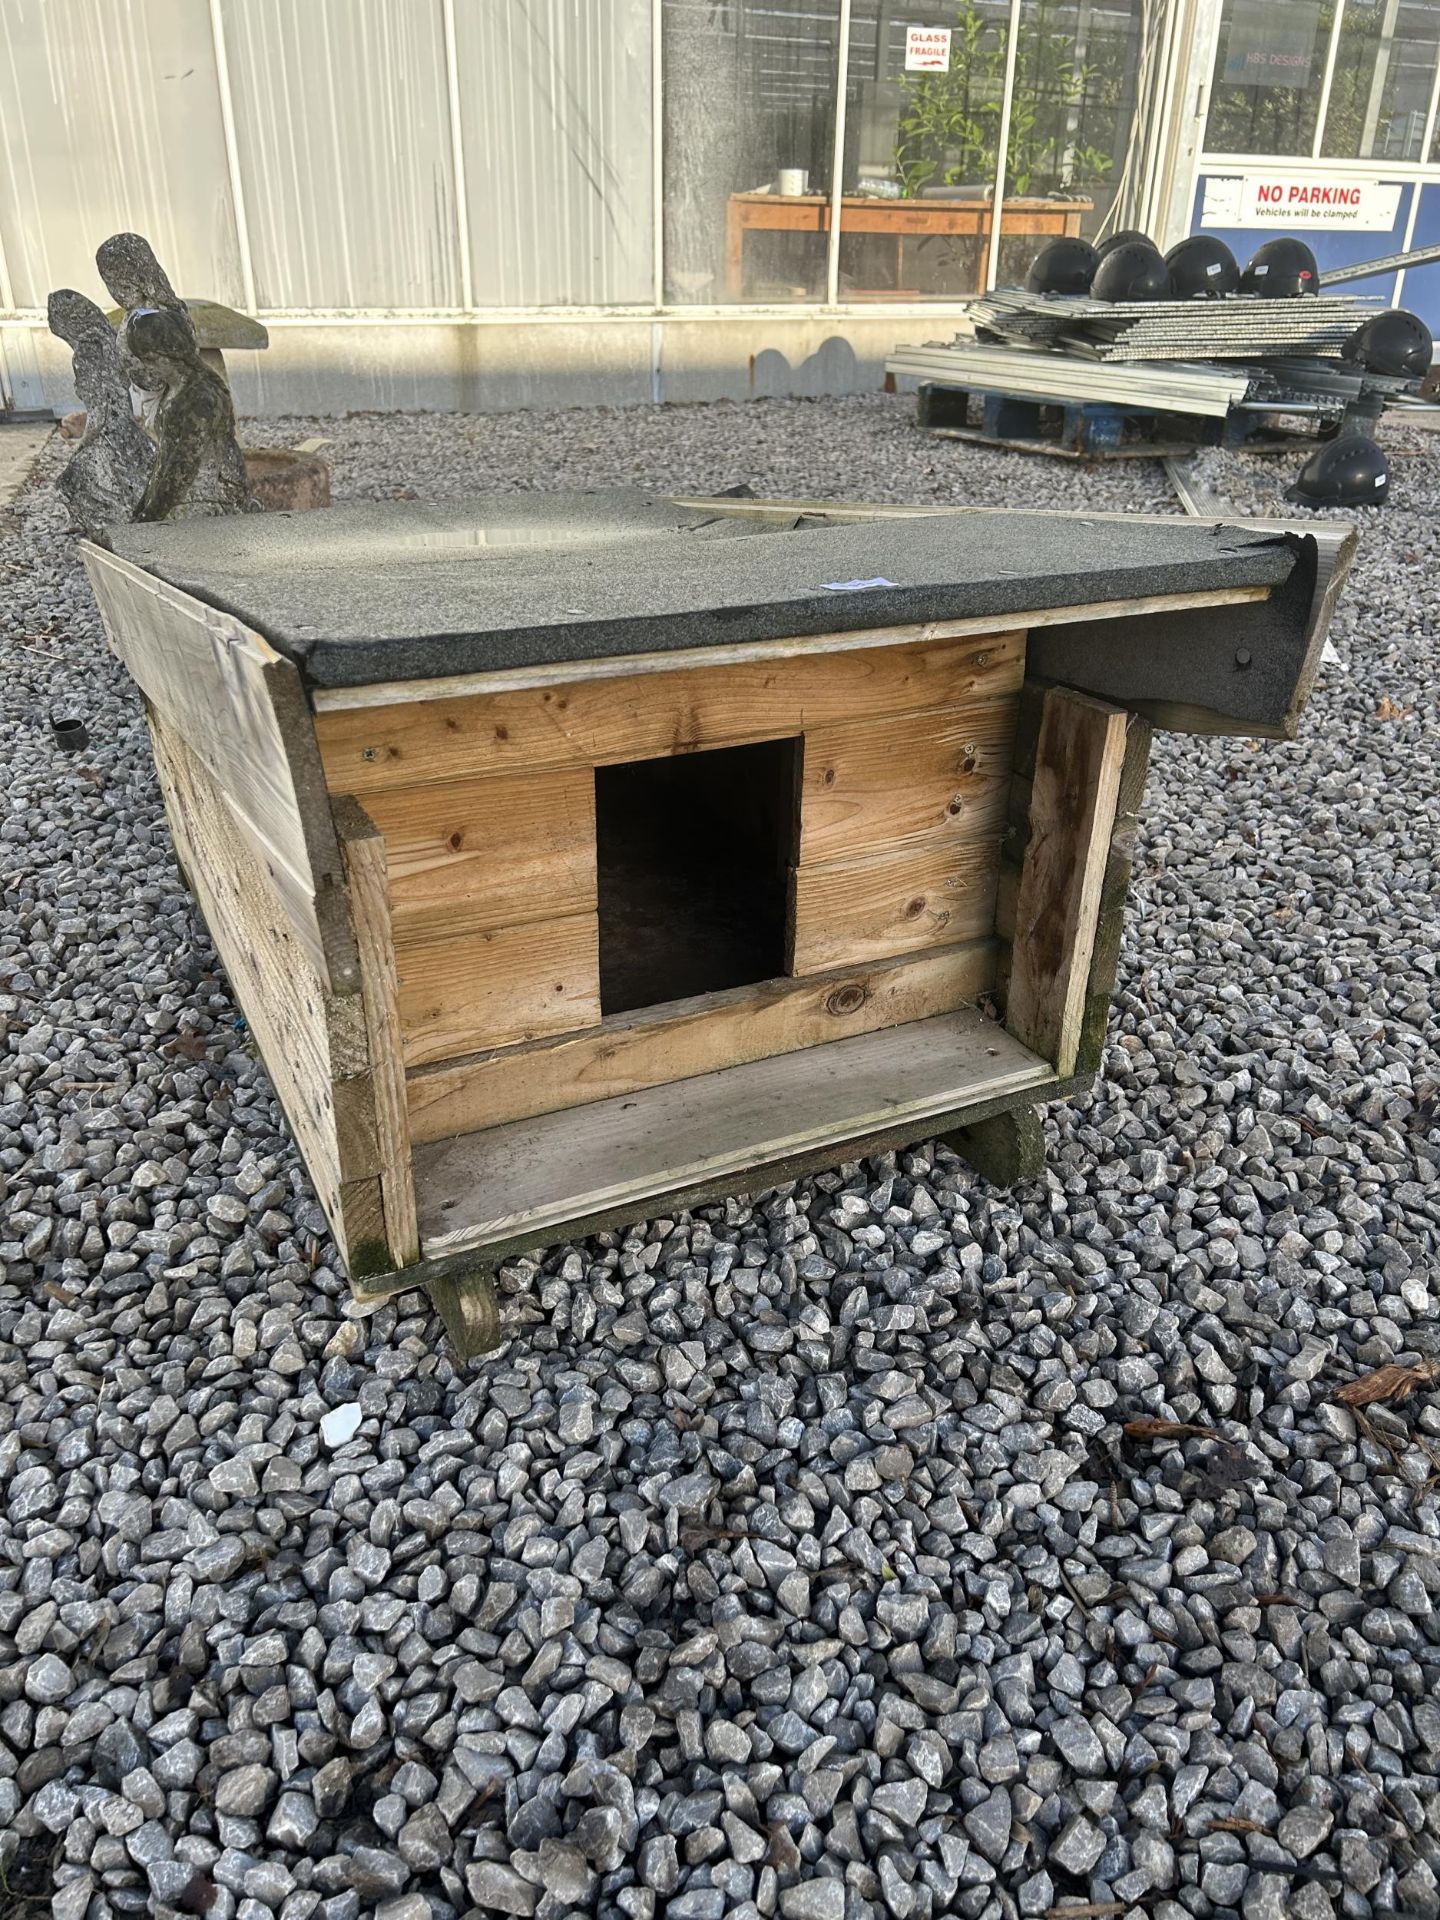 A WOODEN RABBIT HUTCH WITH FELT ROOF